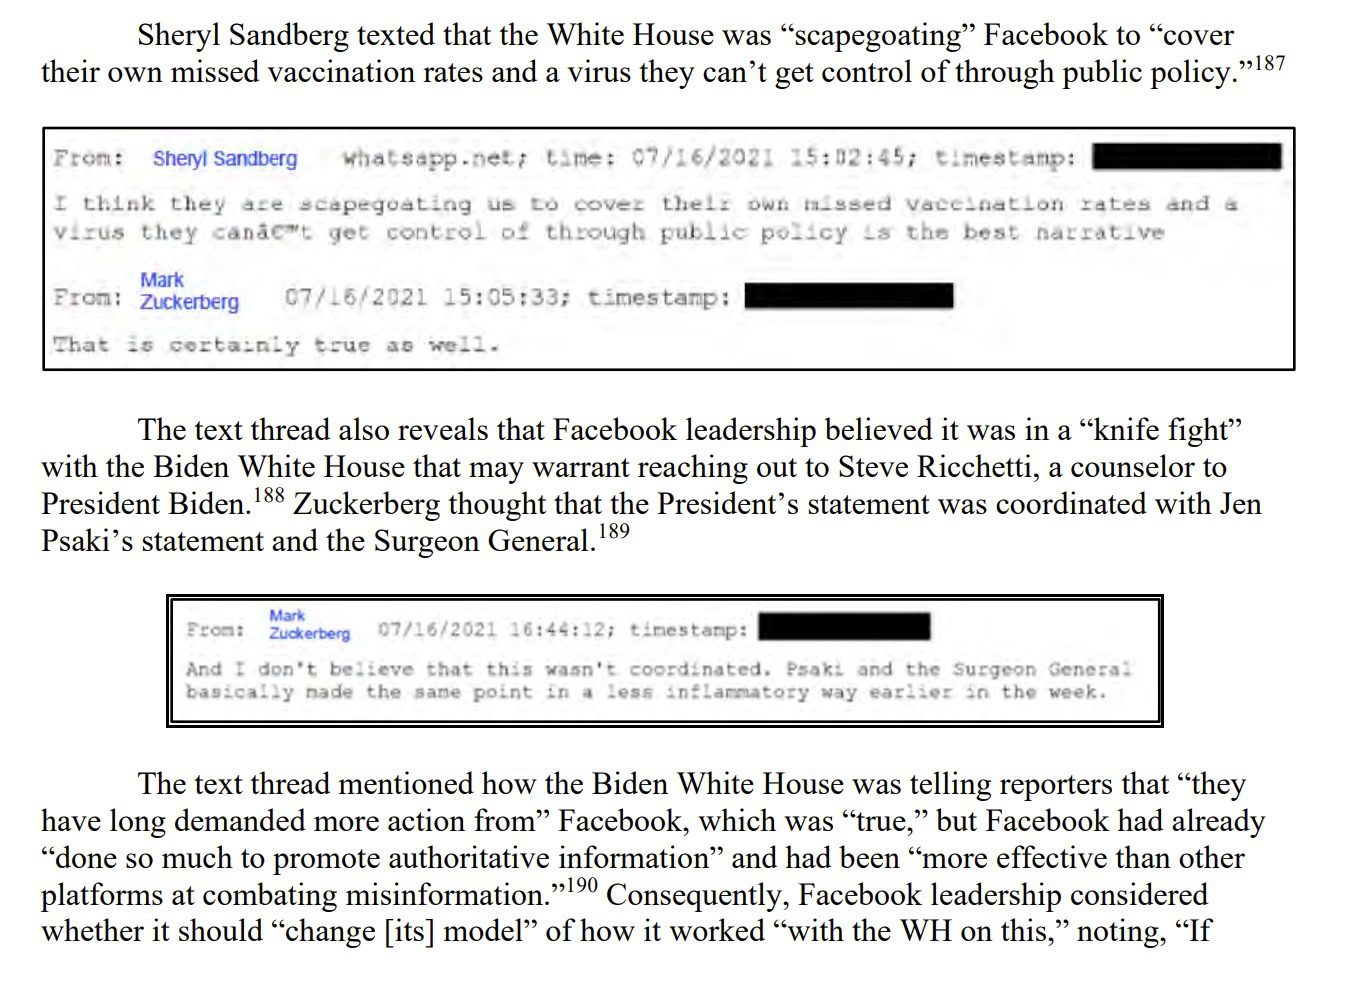 Documents Reveal Facebook Described Its Struggle with Biden White House on COVID-19 Censorship as a “Knife Fight”